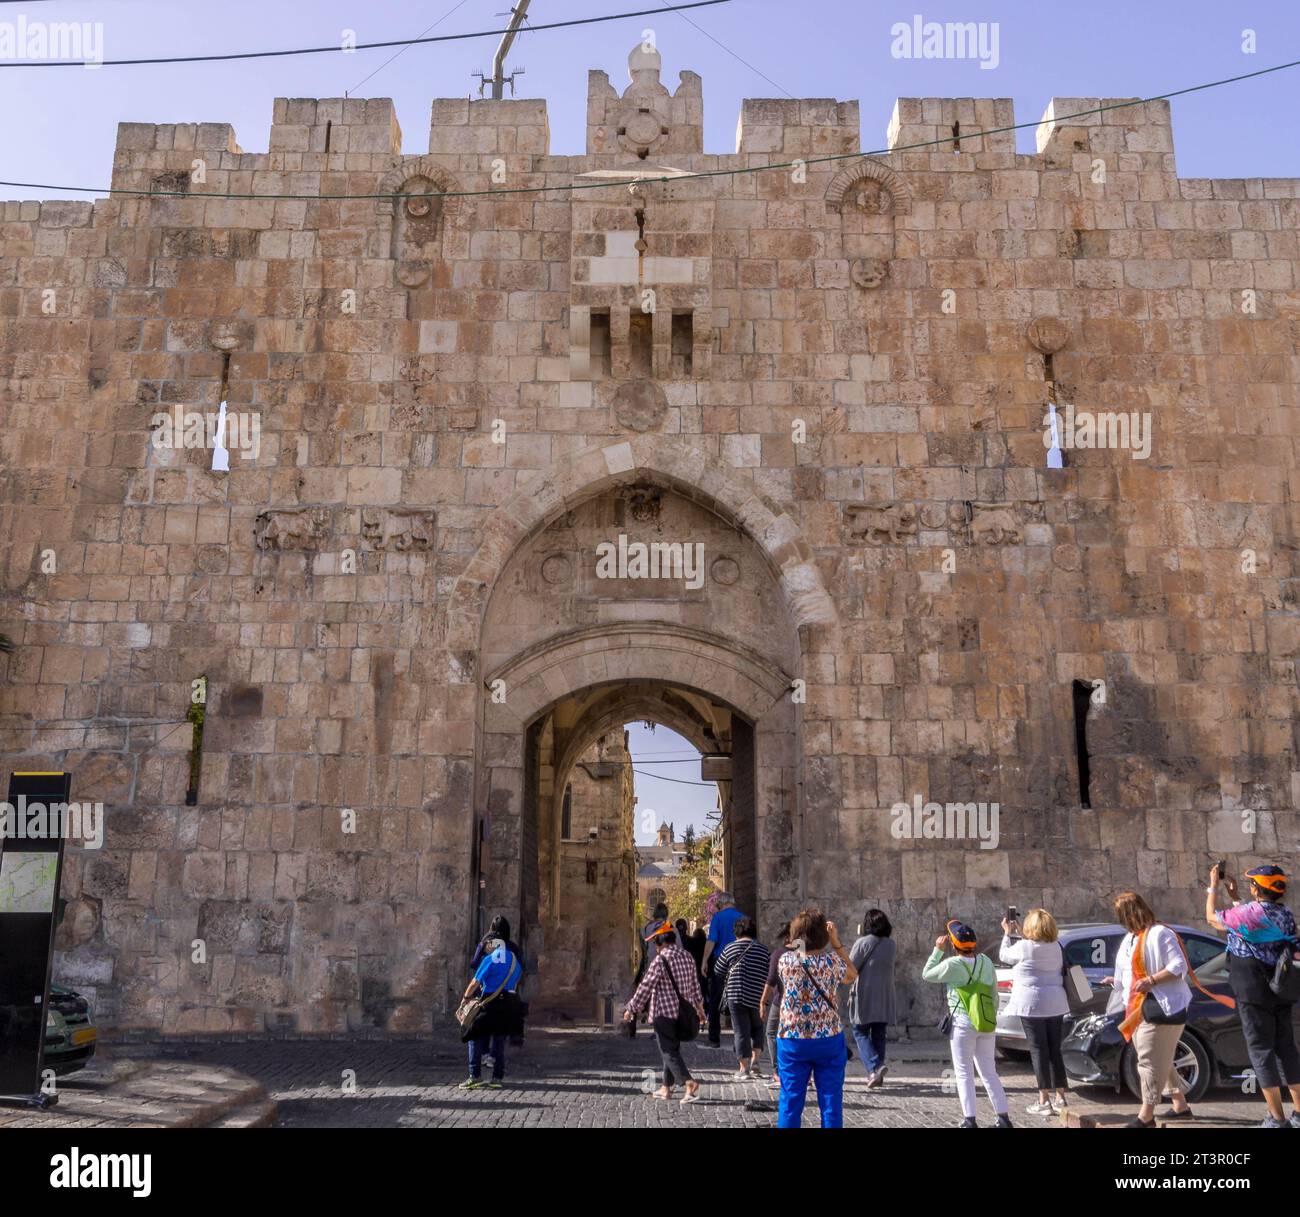 The tourists at Lion's gate, the medieval stone entrance to the Old Town of Jerusalem in Israel. Stock Photo